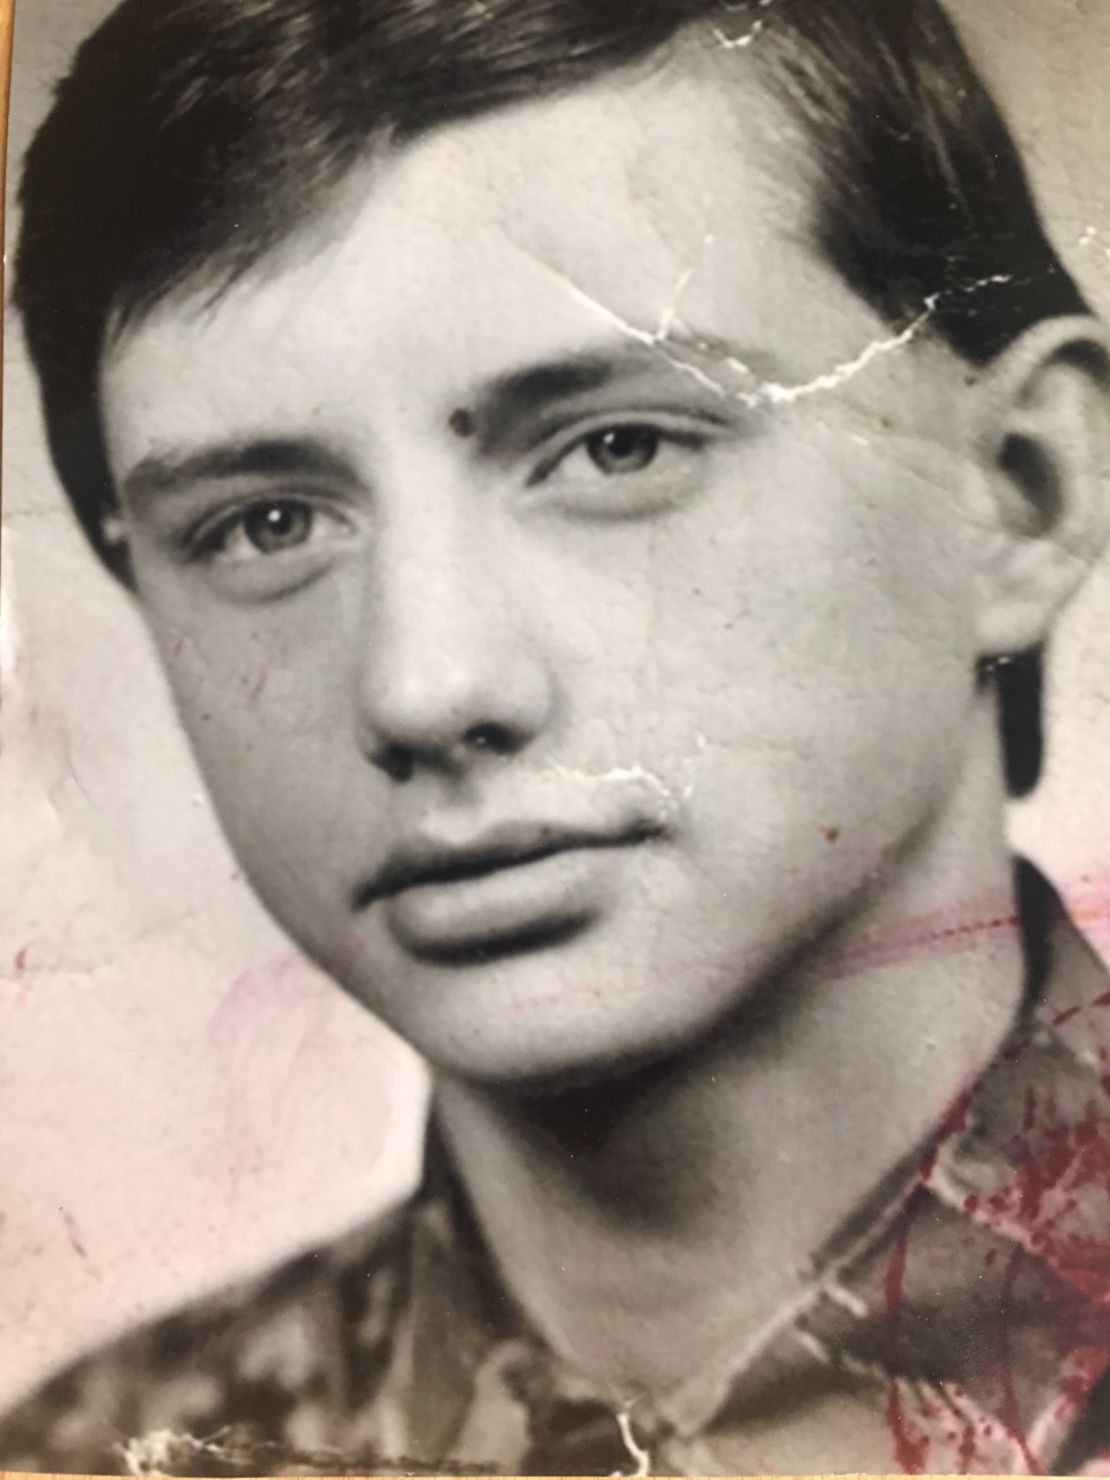 Marek Lisinski as a teenager around the time he was allegedly abused by his local parish priest.